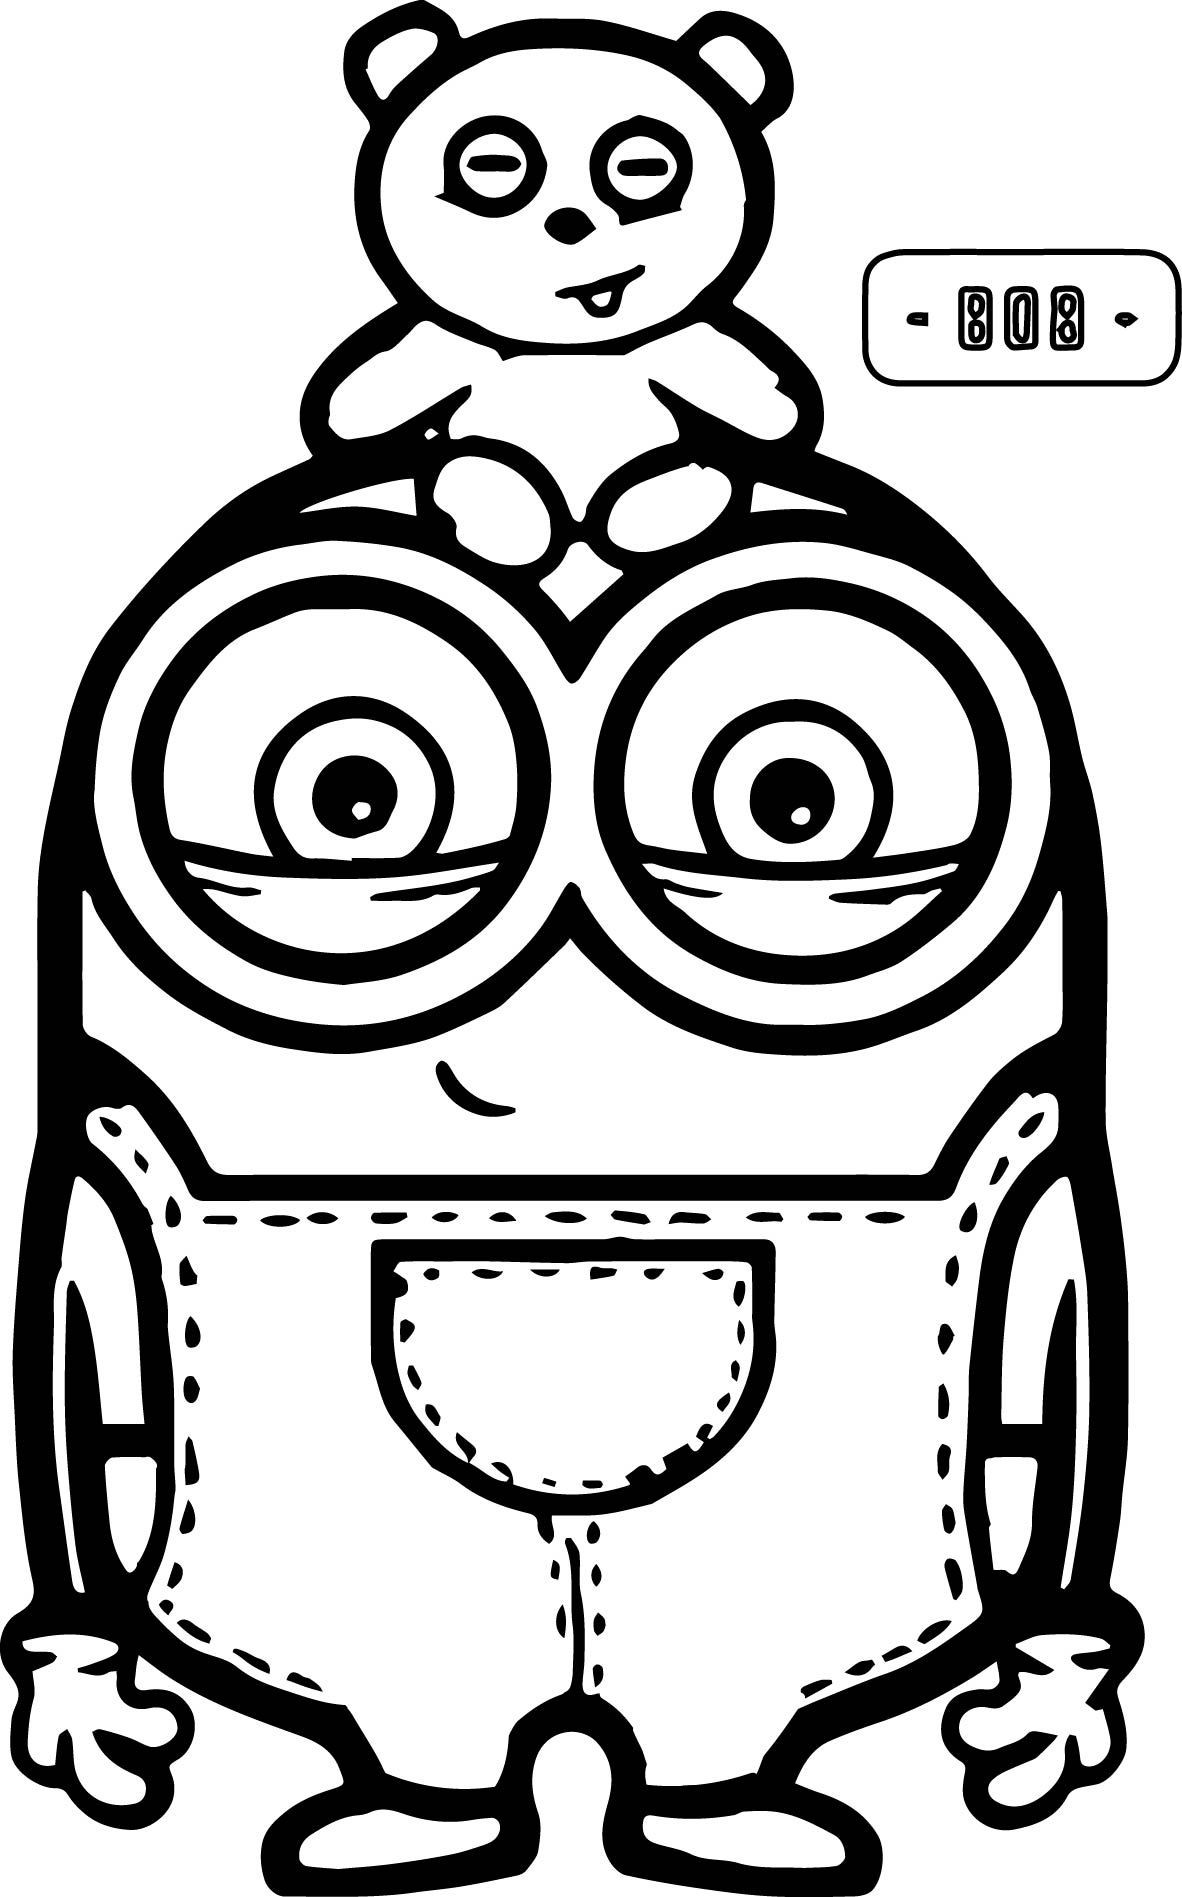 Printable Minions Coloring Pages
 Cute Bob And Bear Minions Coloring Page